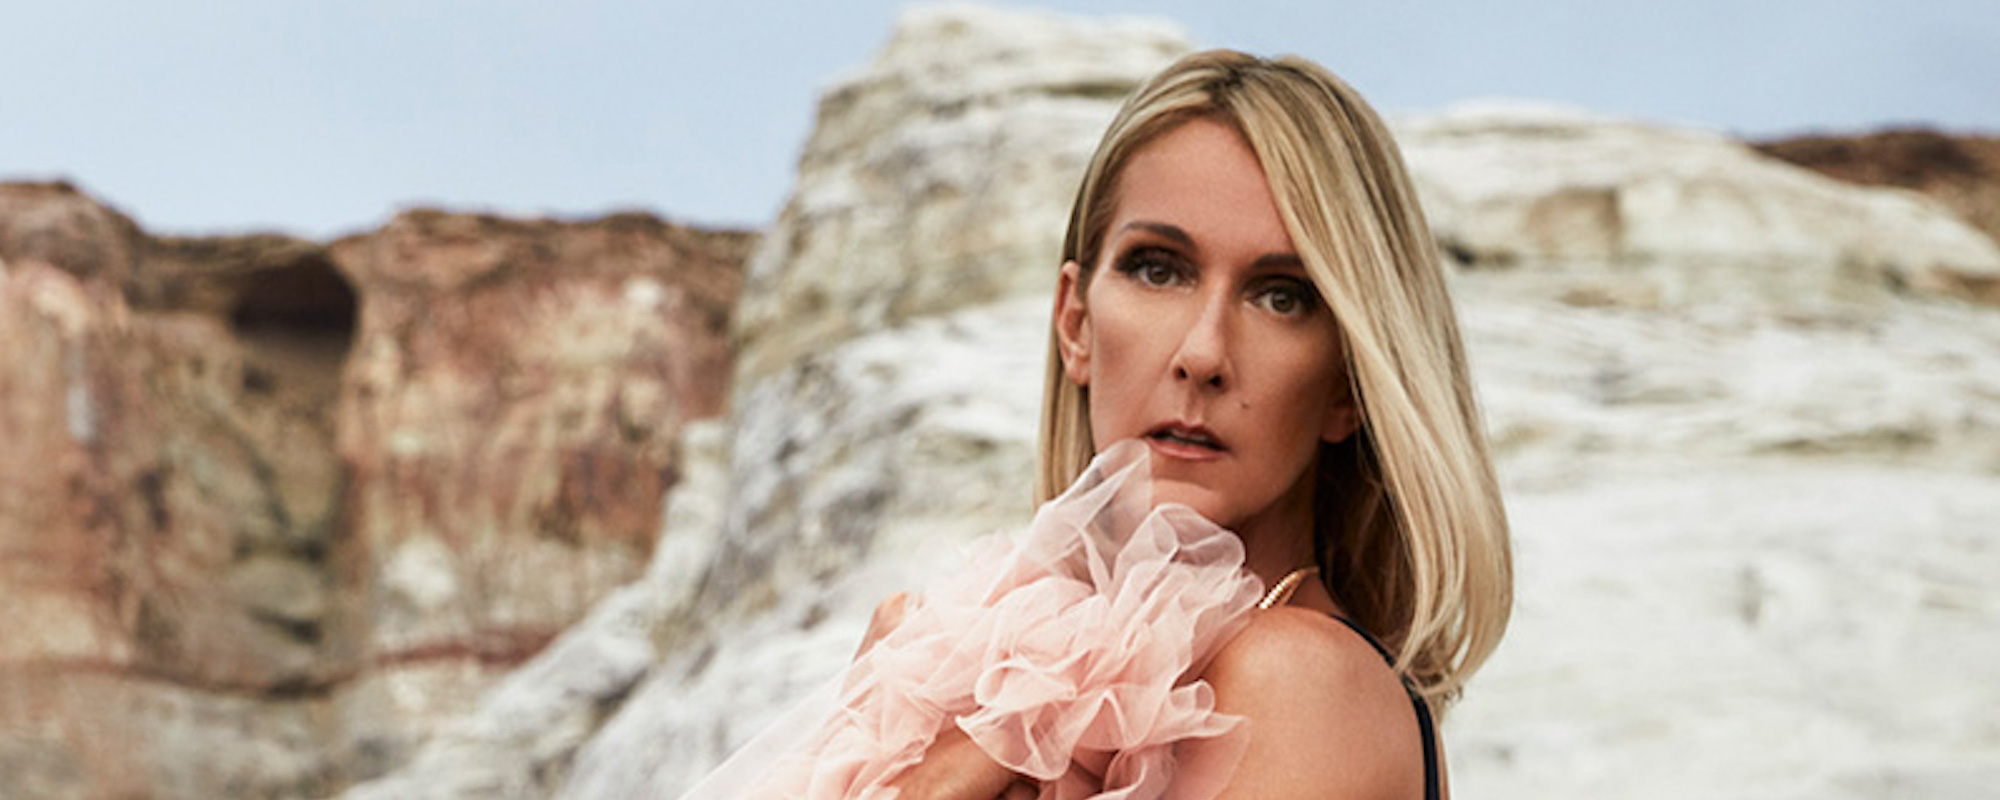 Celine Dion Cancels Tour Due to Ongoing Health Issues